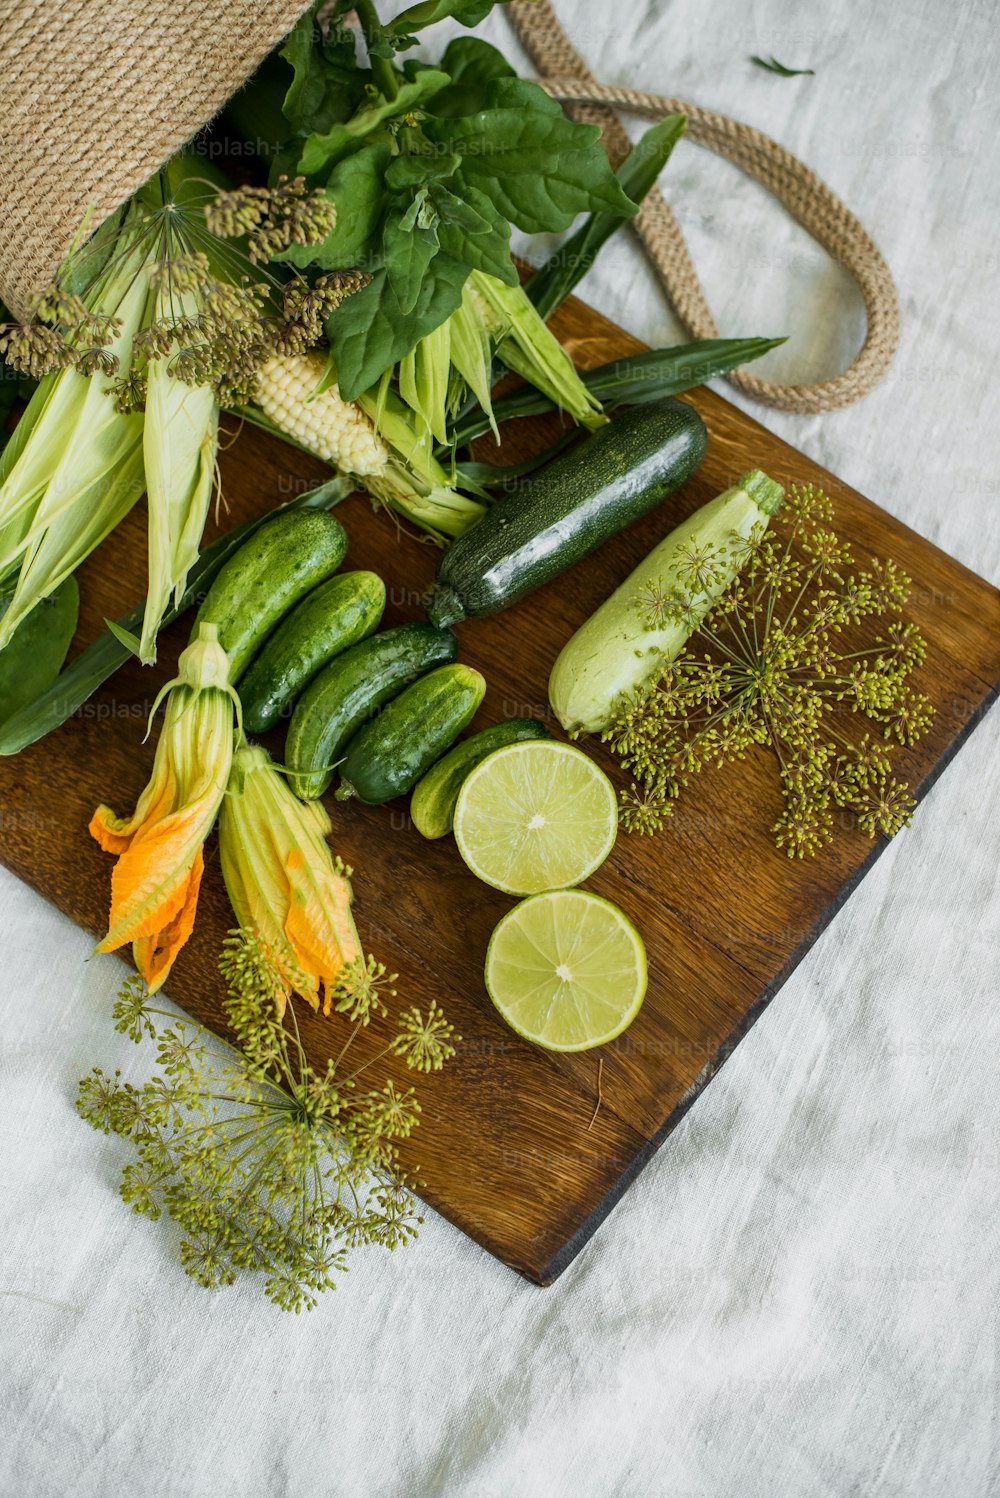 a wooden cutting board topped with cucumbers and limes